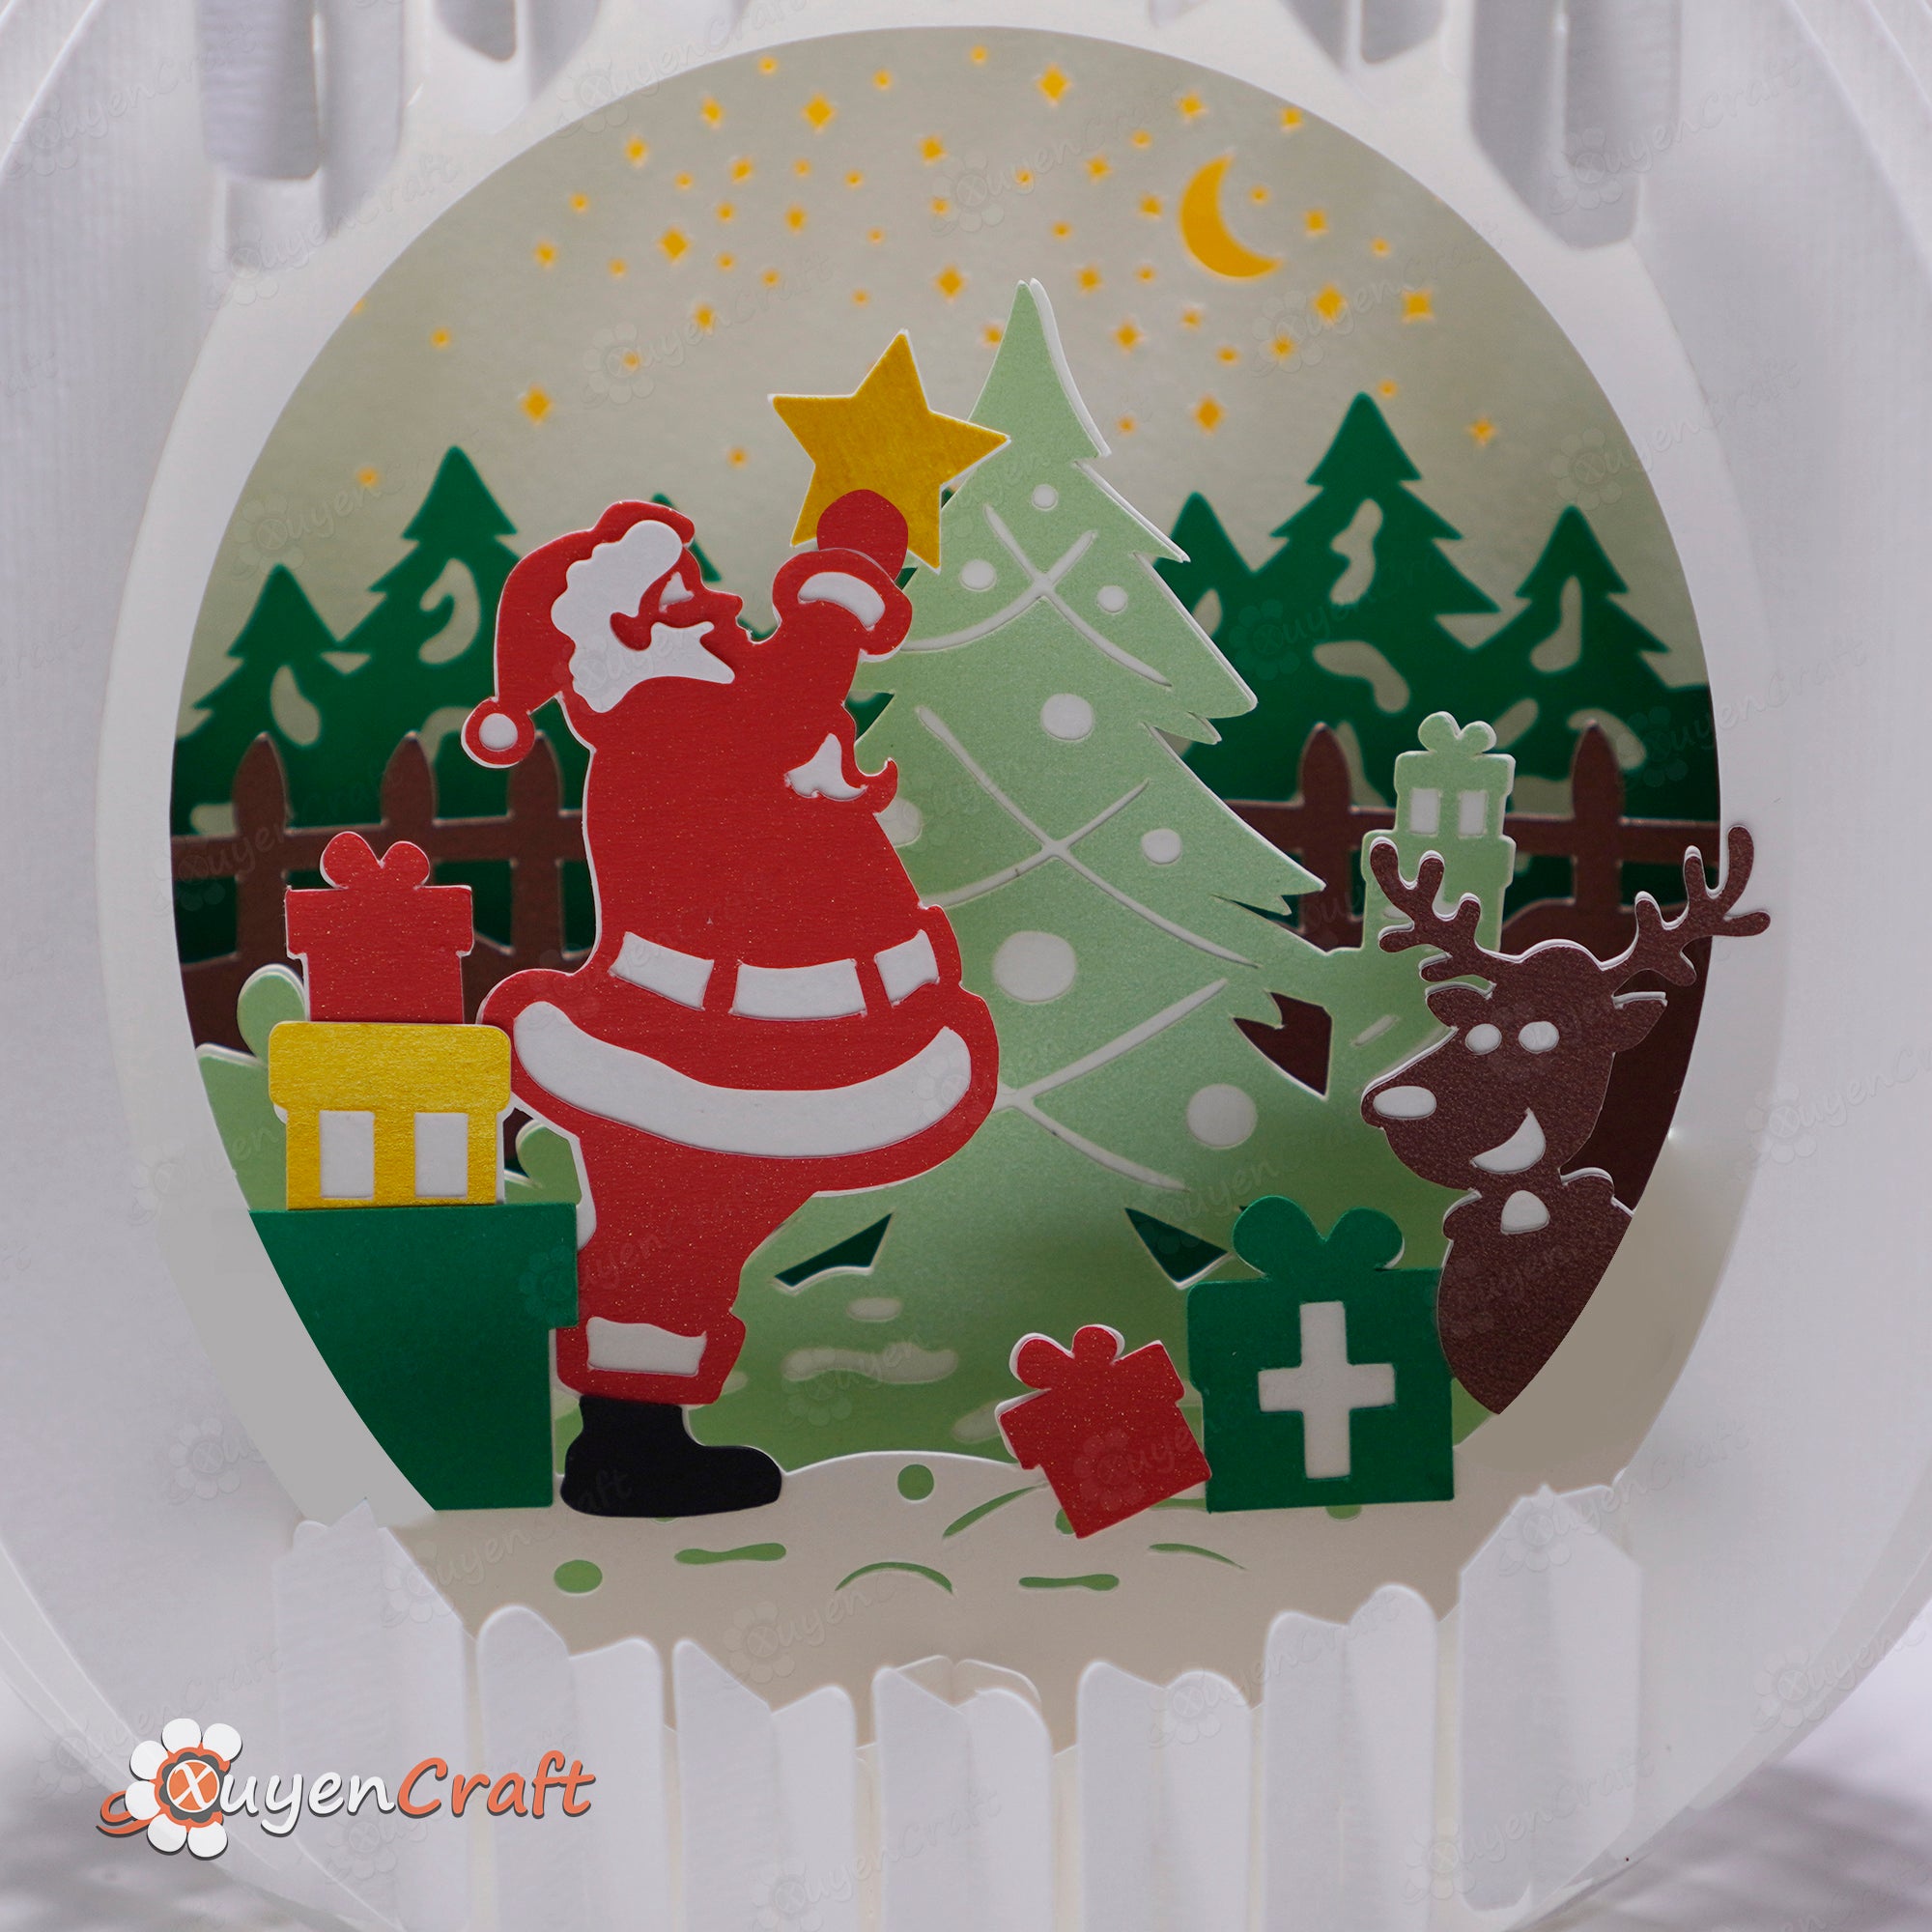 Color version Santa Claus in Sphere Pop Up SVG, Silhouette Studio for DIY Craft Merry Christmas, Snow Globe Pop Up SVG for Cricut Projects